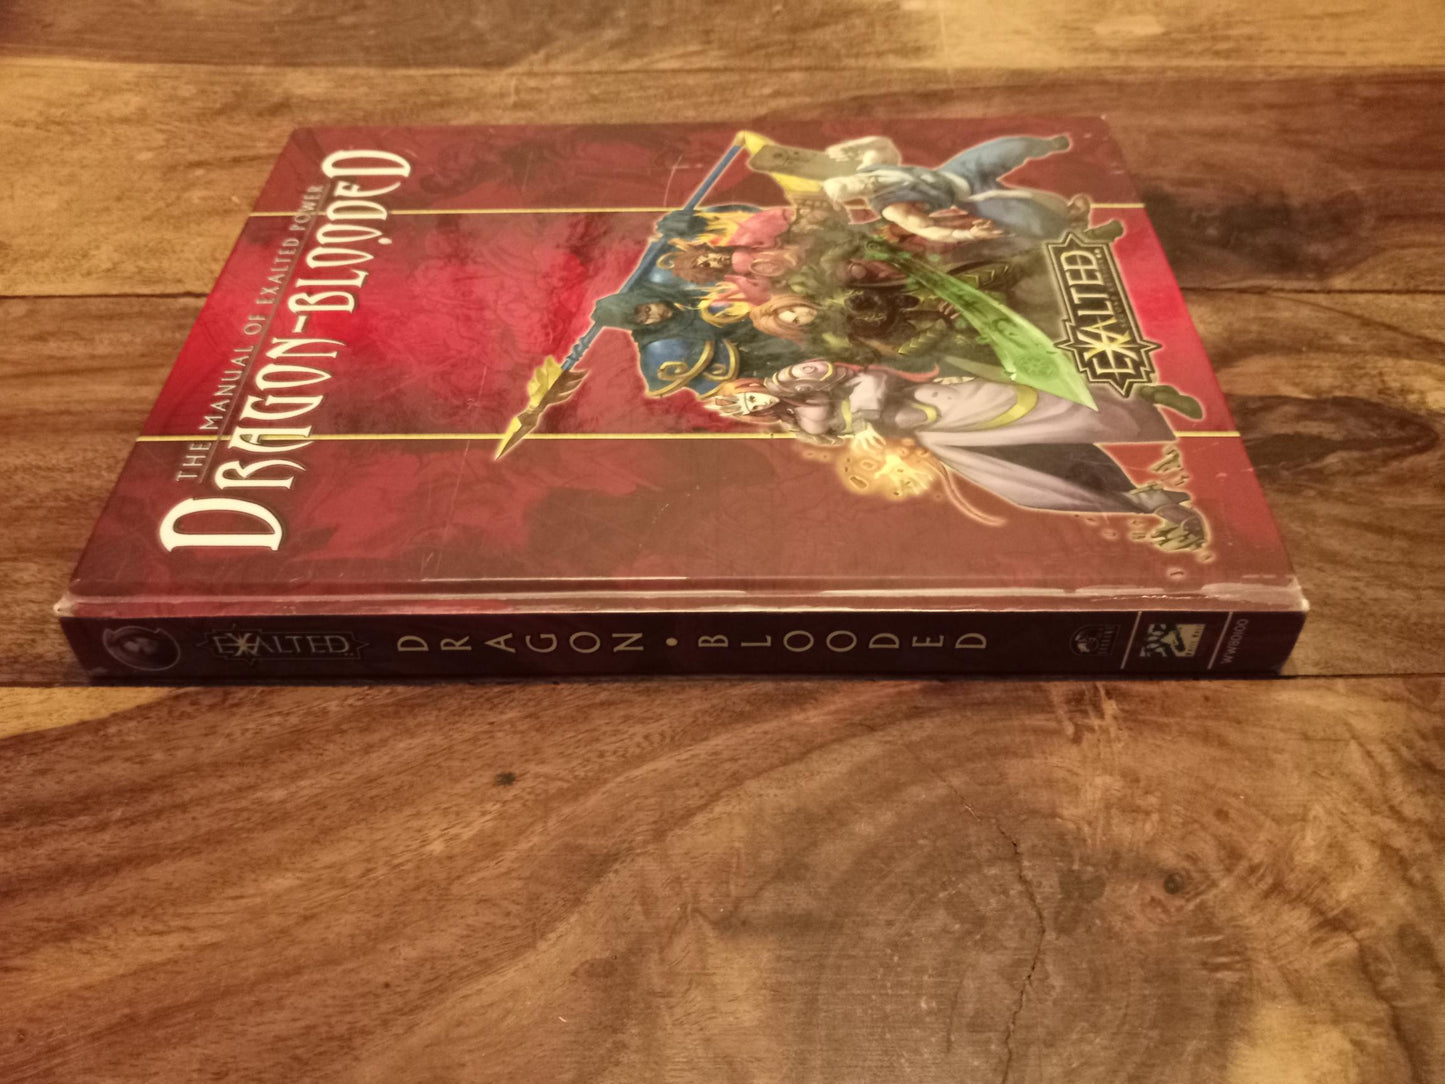 Exalted Dragon-Blooded The Manual of Exalted Power 2nd Ed Hardcover White Wolf 2006